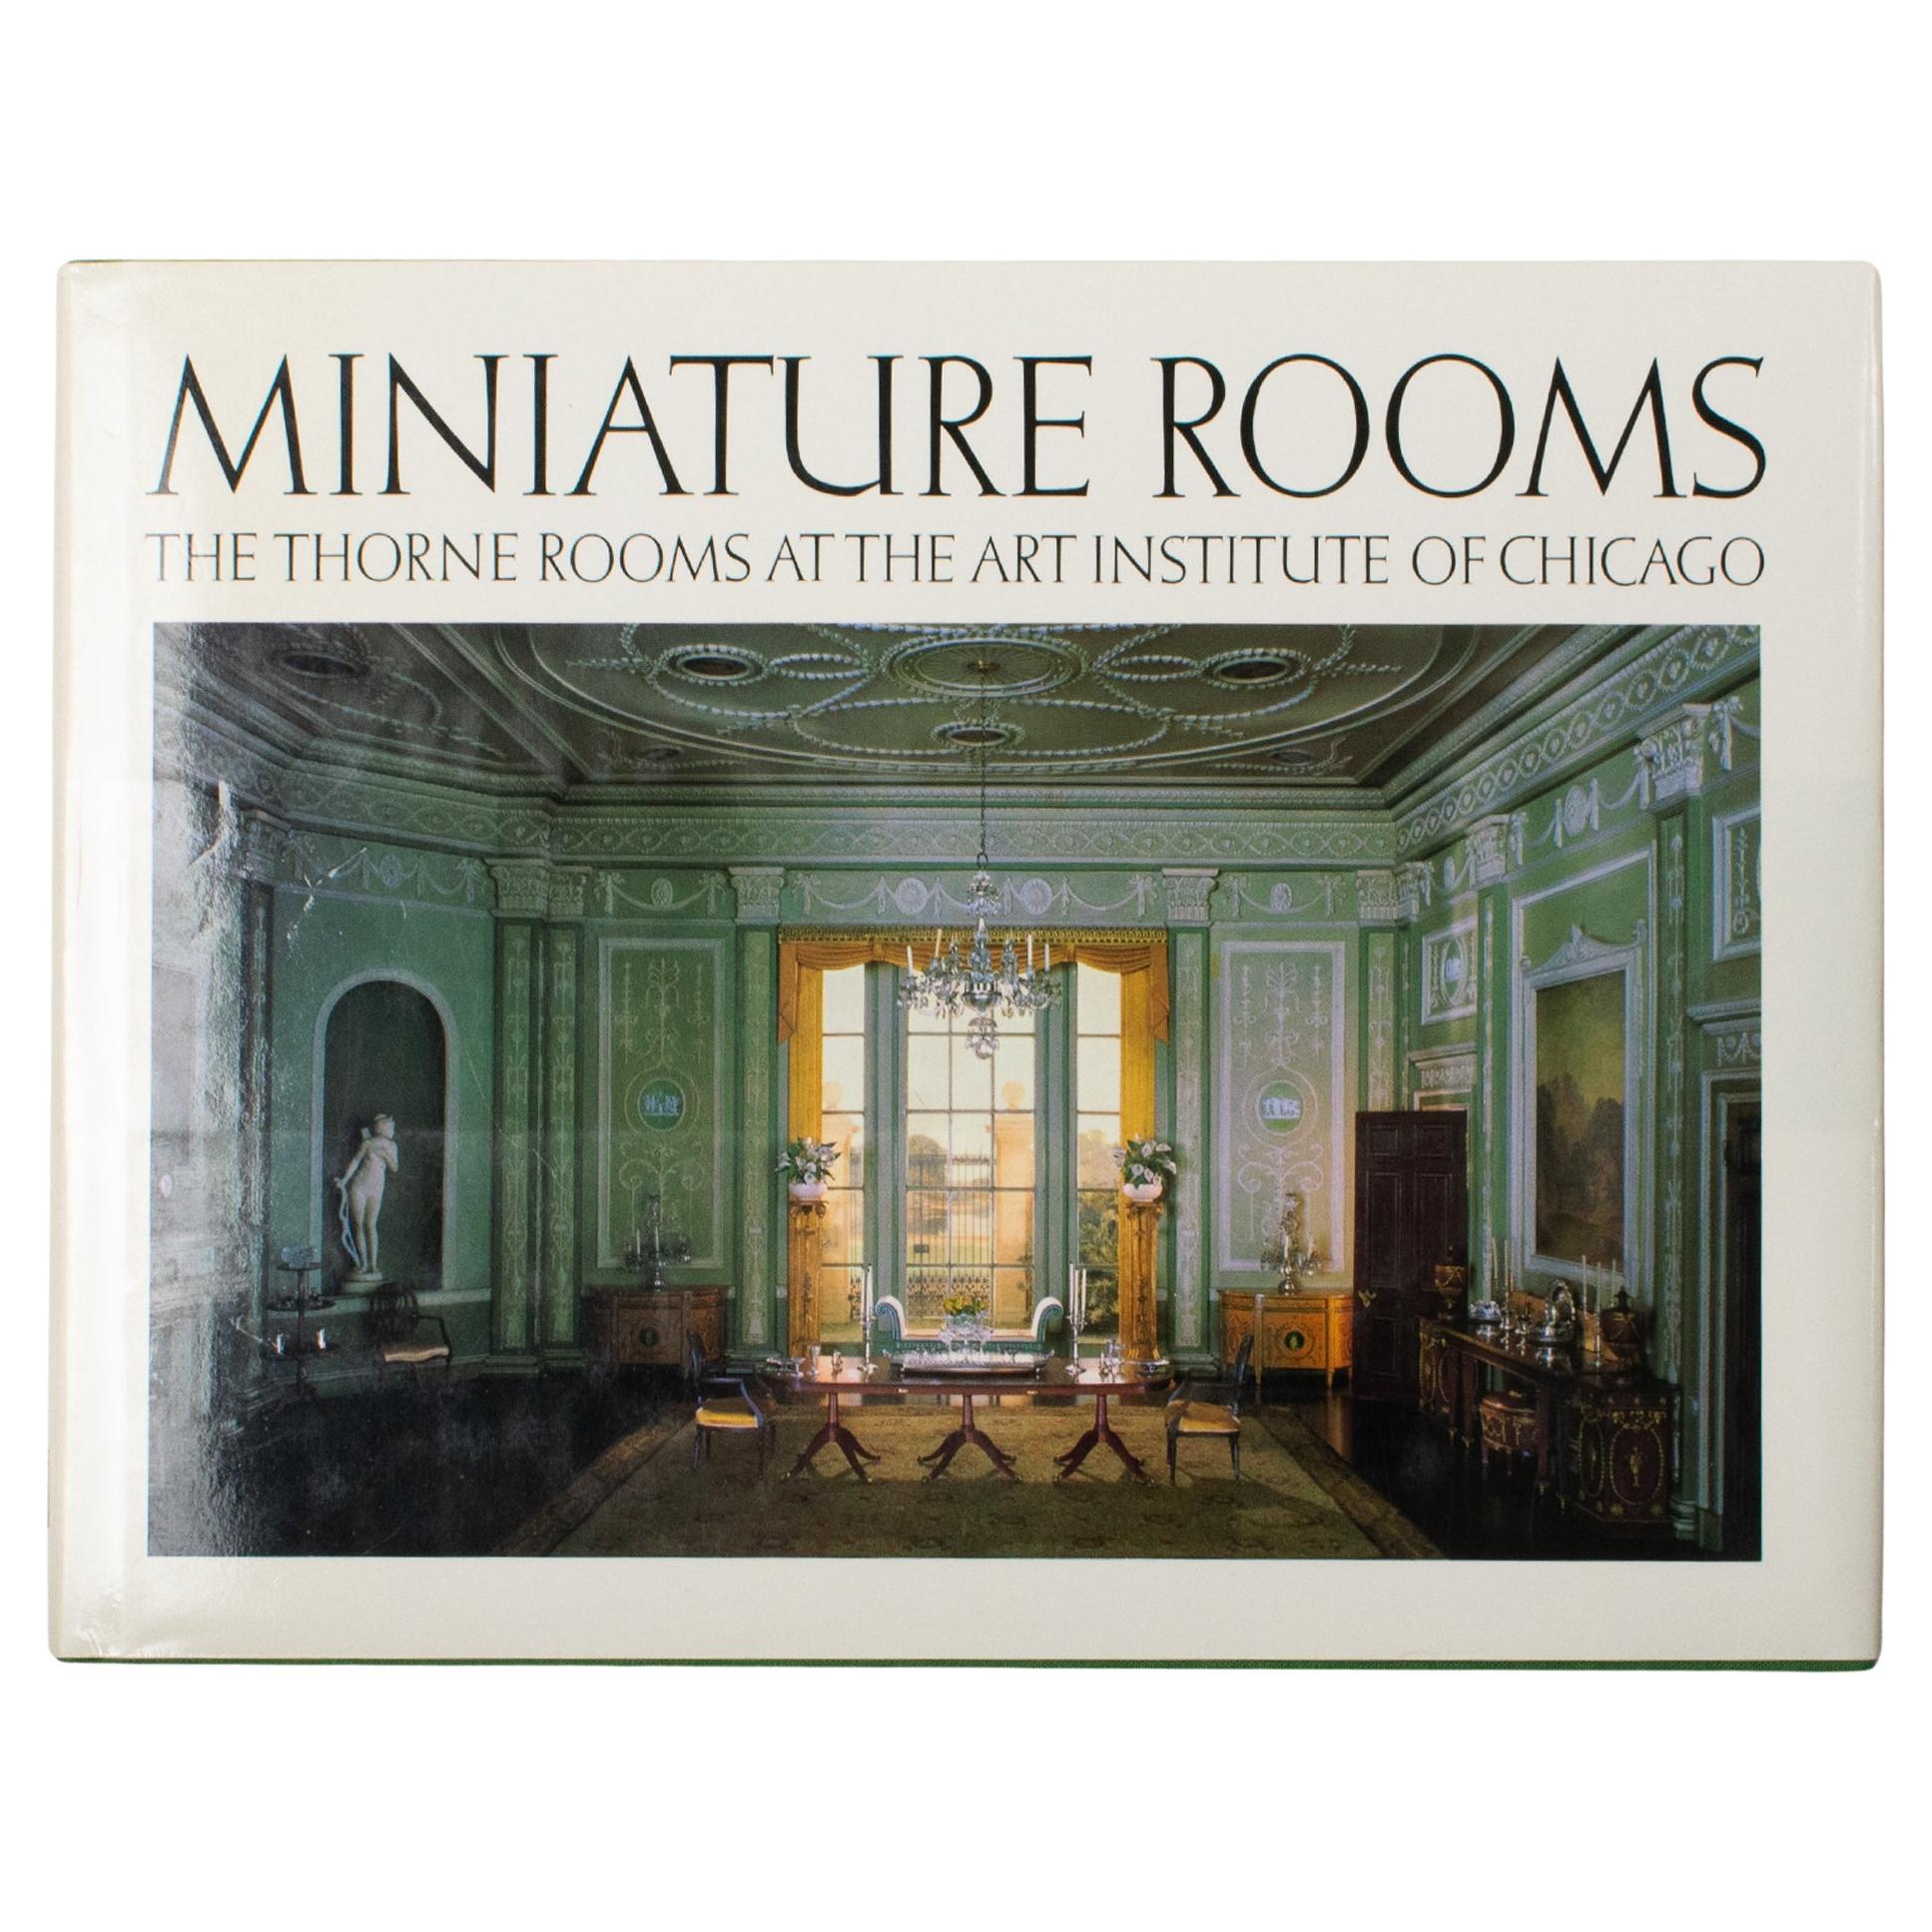 Livre « Miniature Rooms, The Thorne Rooms at the Art Institute of Chicago », 1983